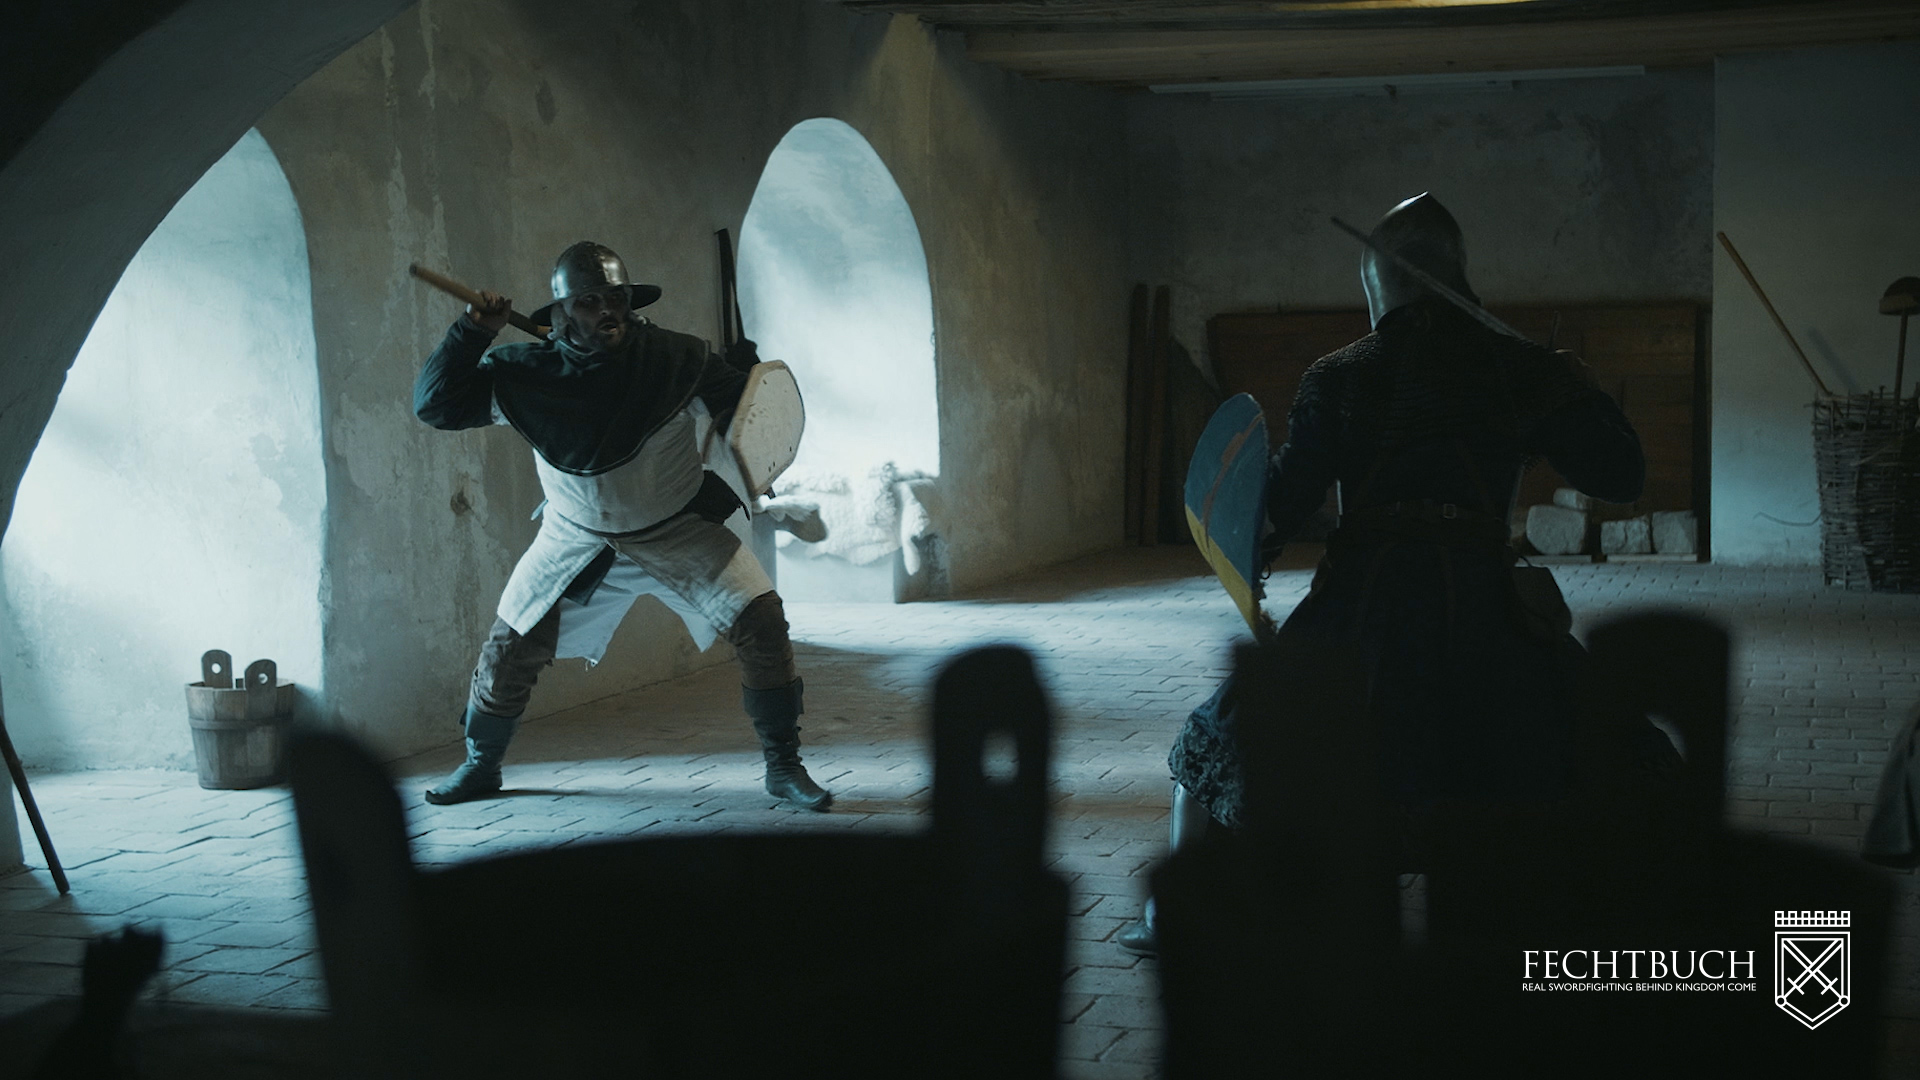 Fechtbuch: The Real Swordfighting behind Kingdom Come Featured Screenshot #1